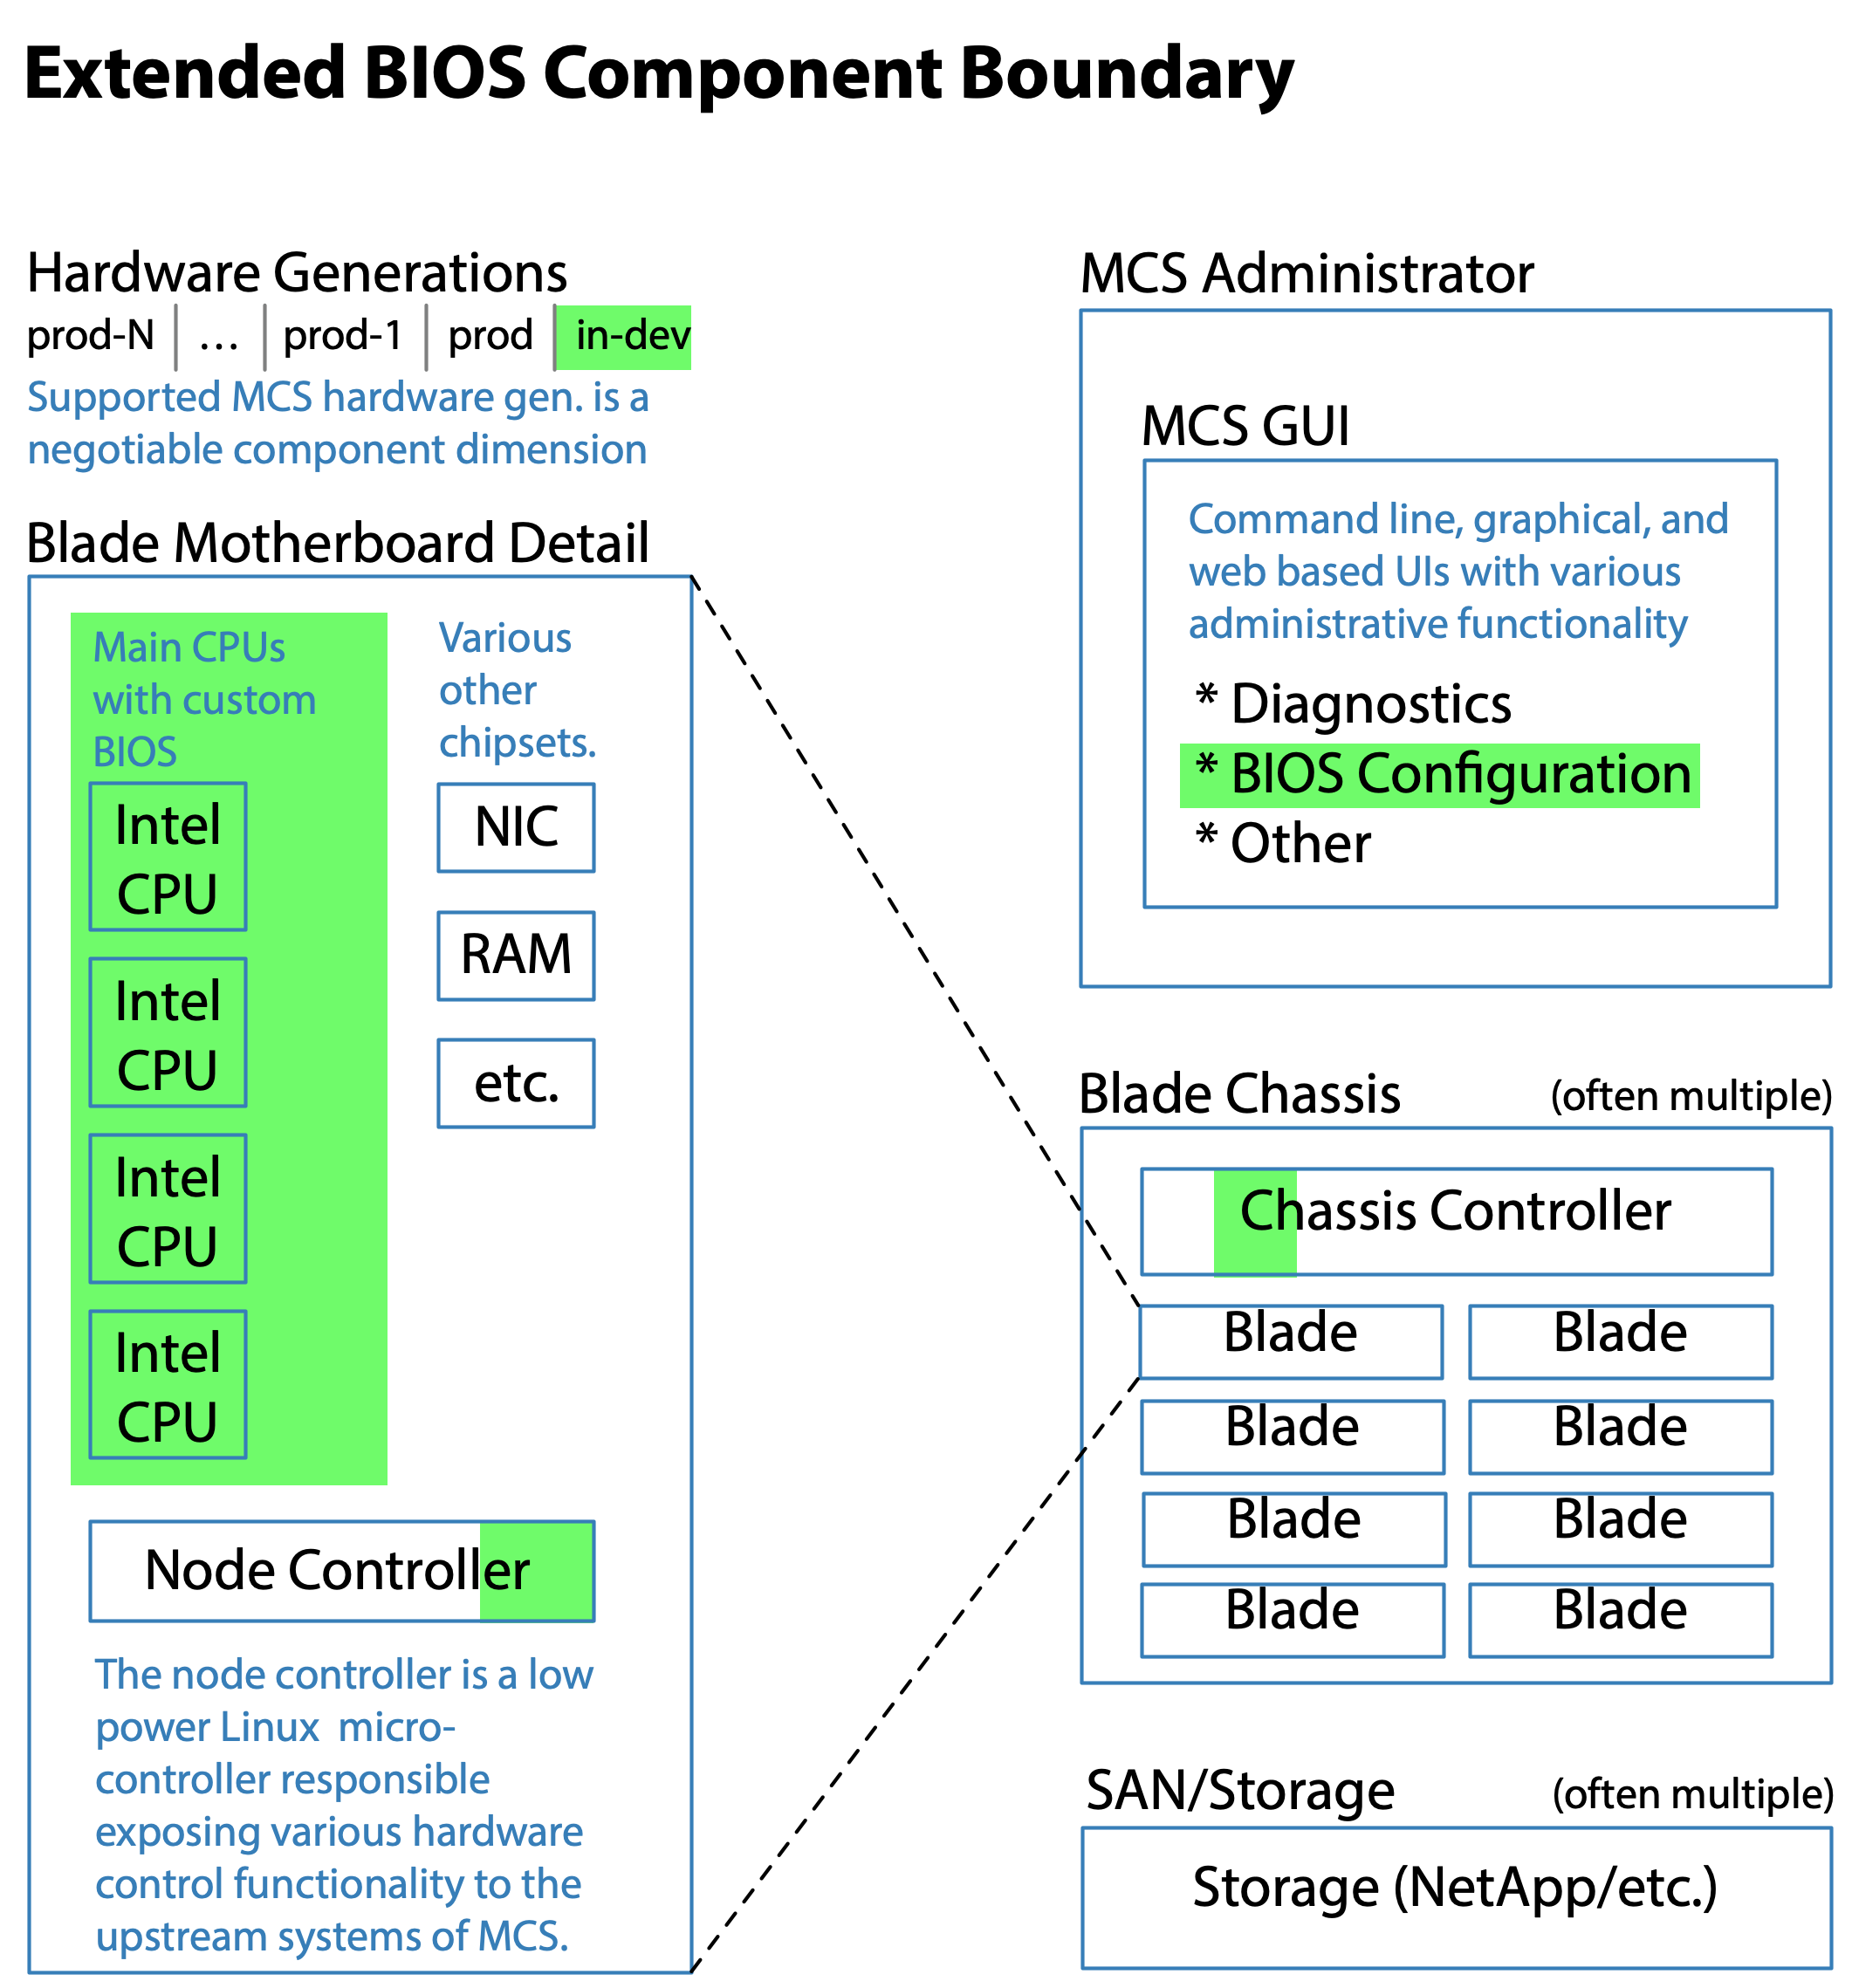 Extended BIOS Component Boundary